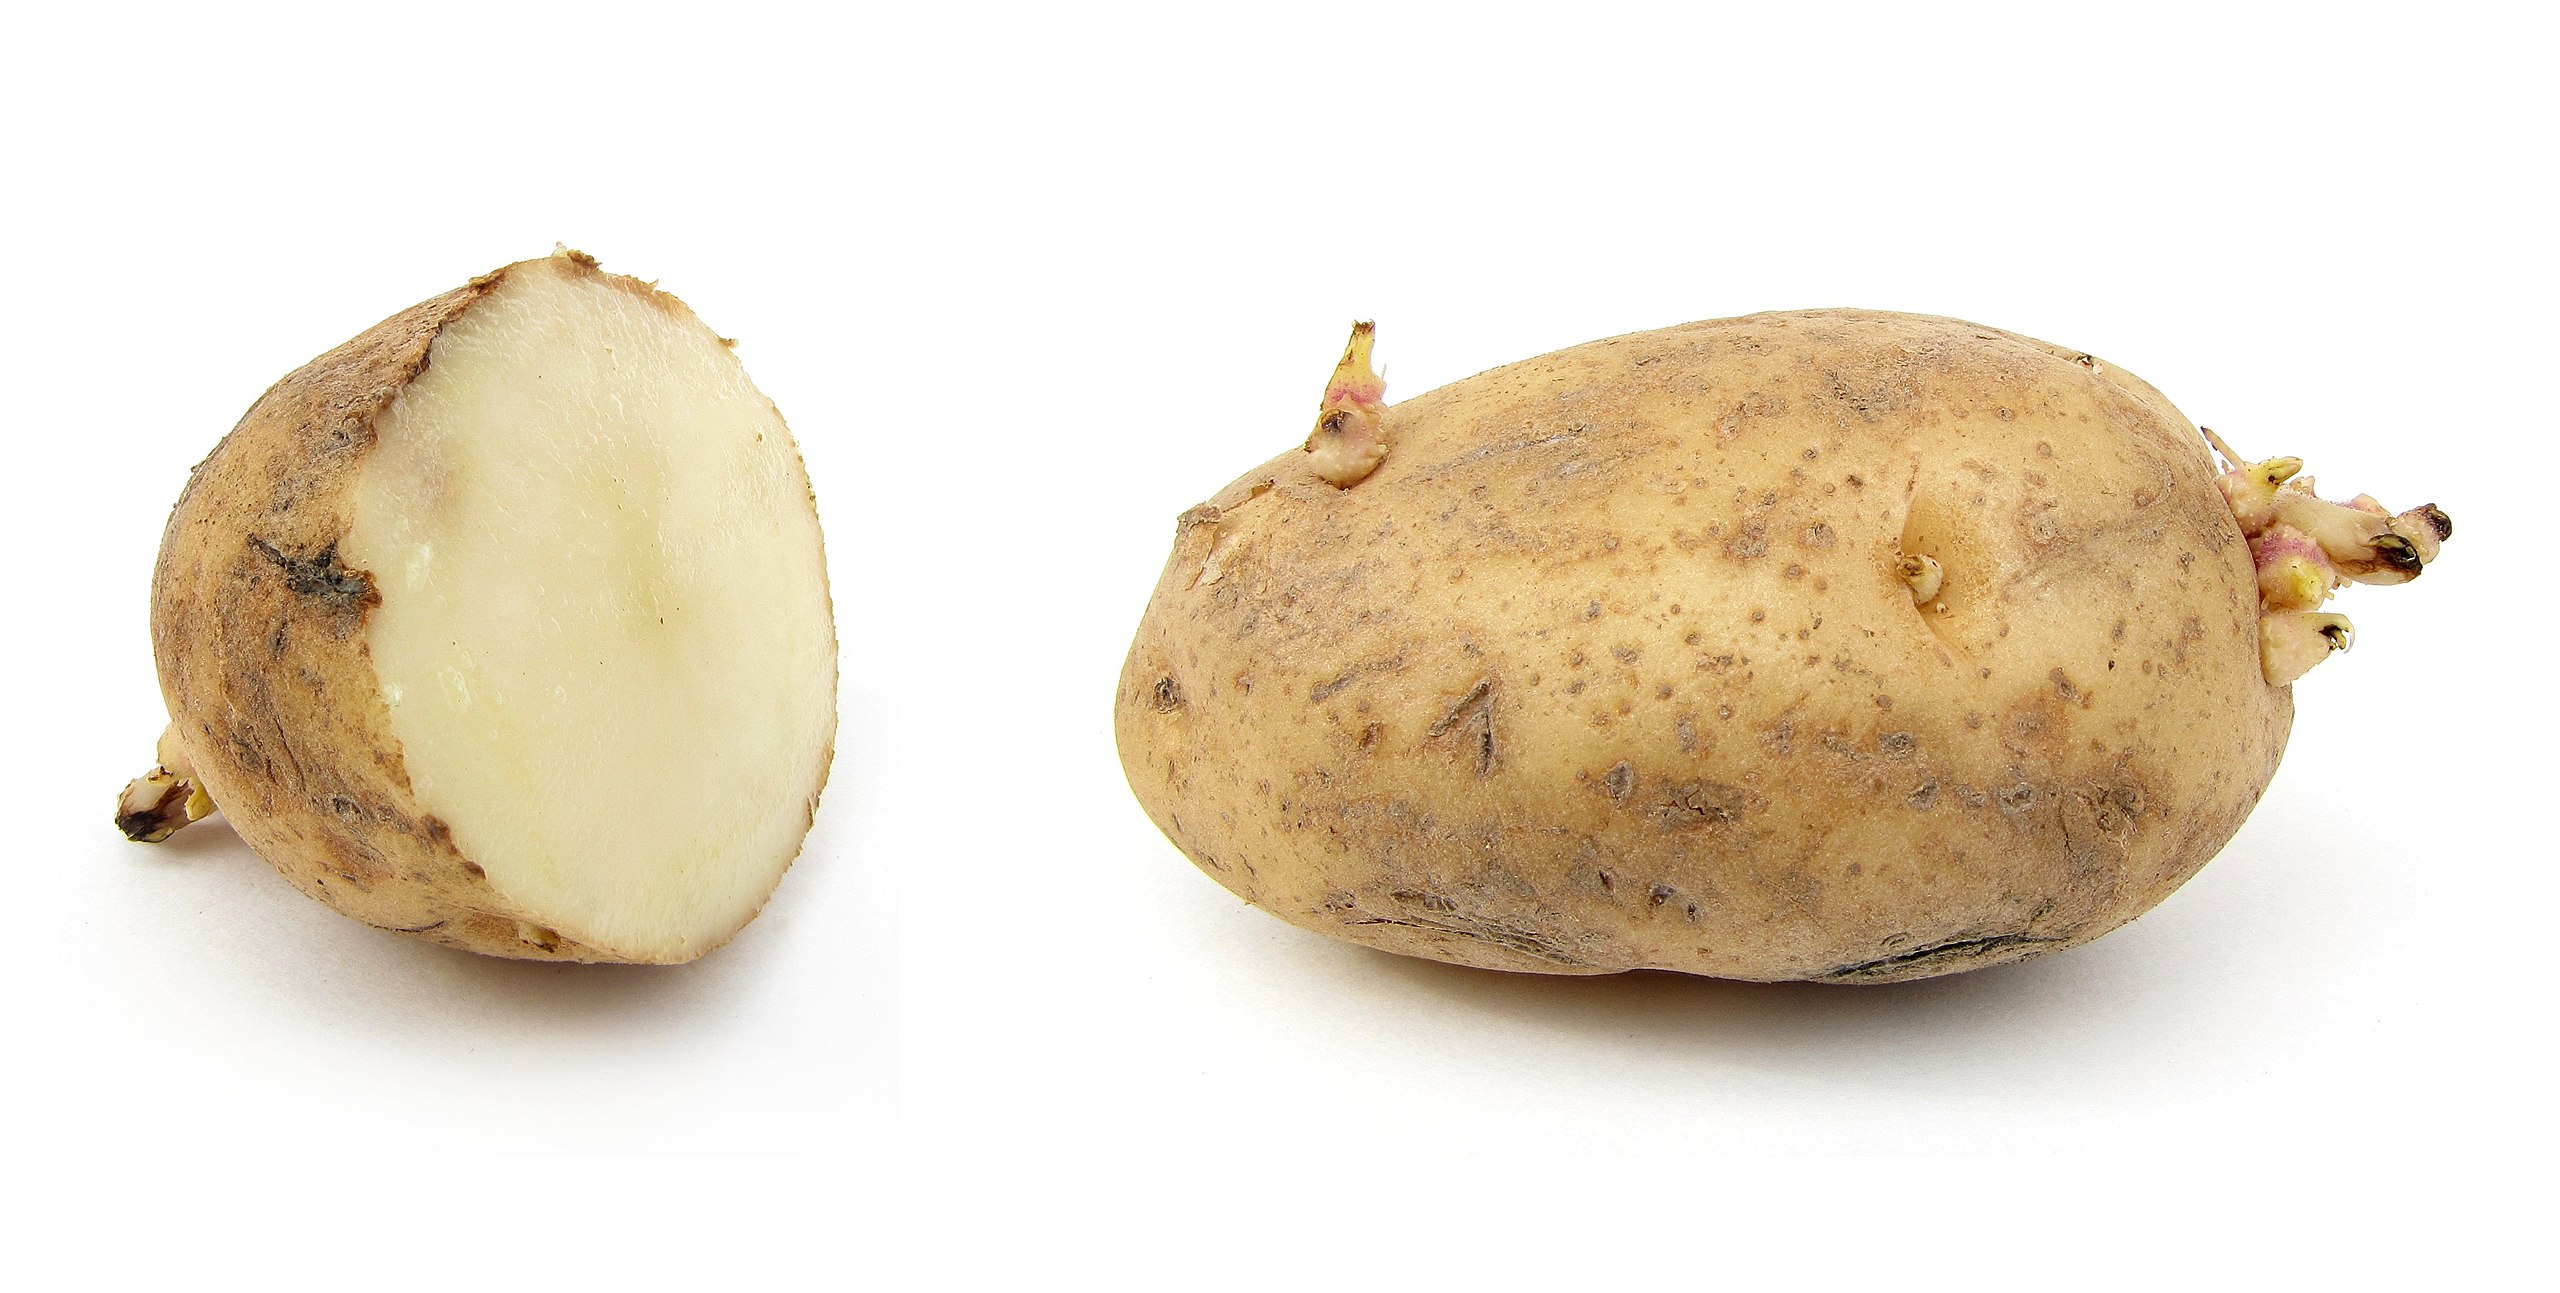 2560px-Russet_potato_cultivar_with_sprouts.jpg